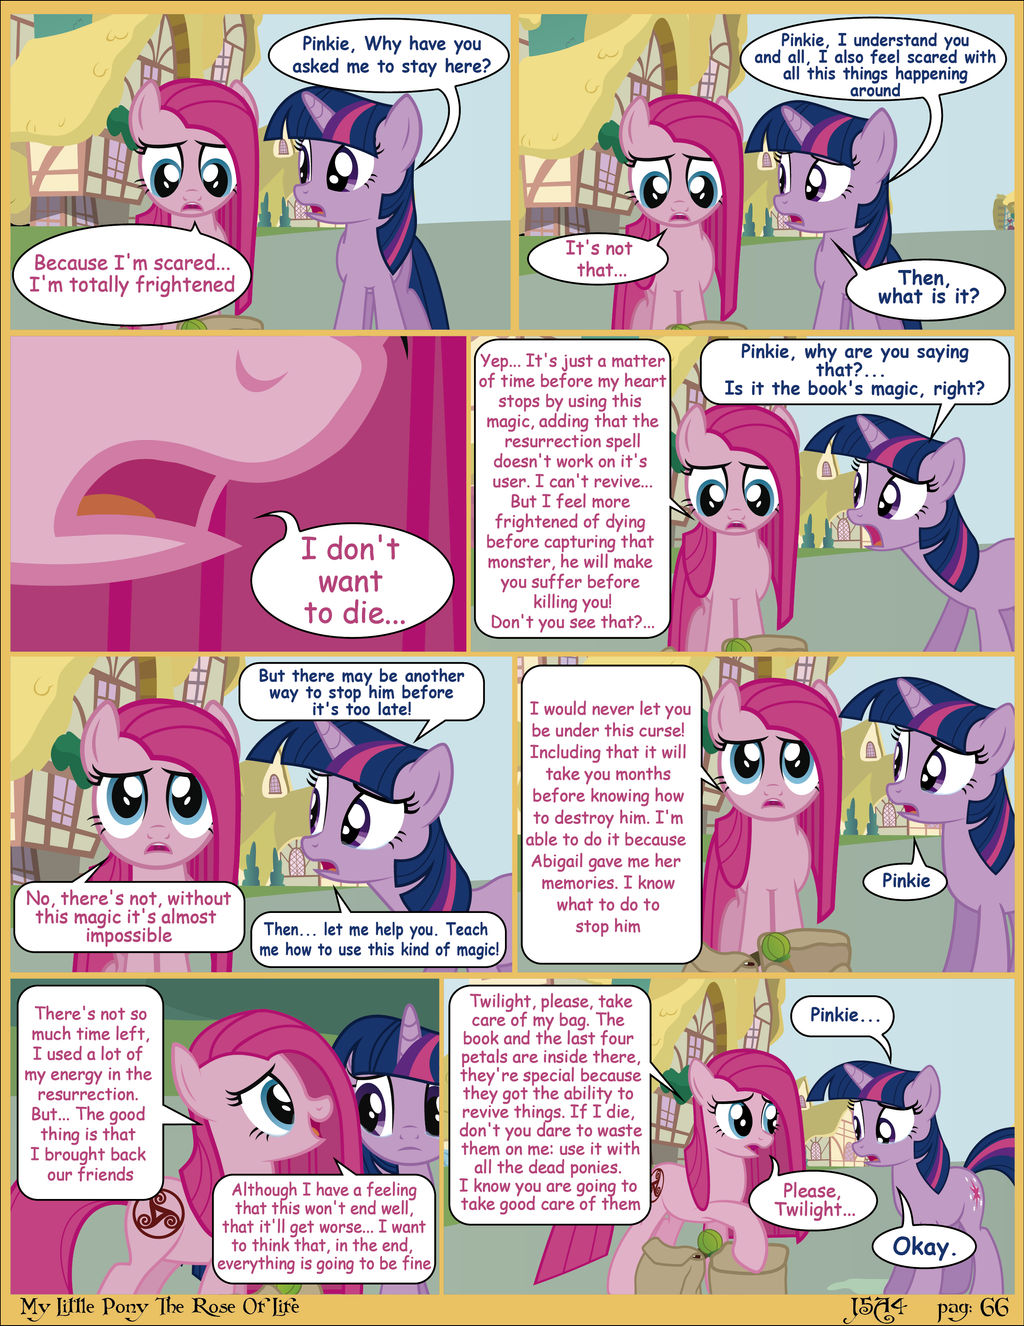 MLP The Rose Of Life pag 66 (English)